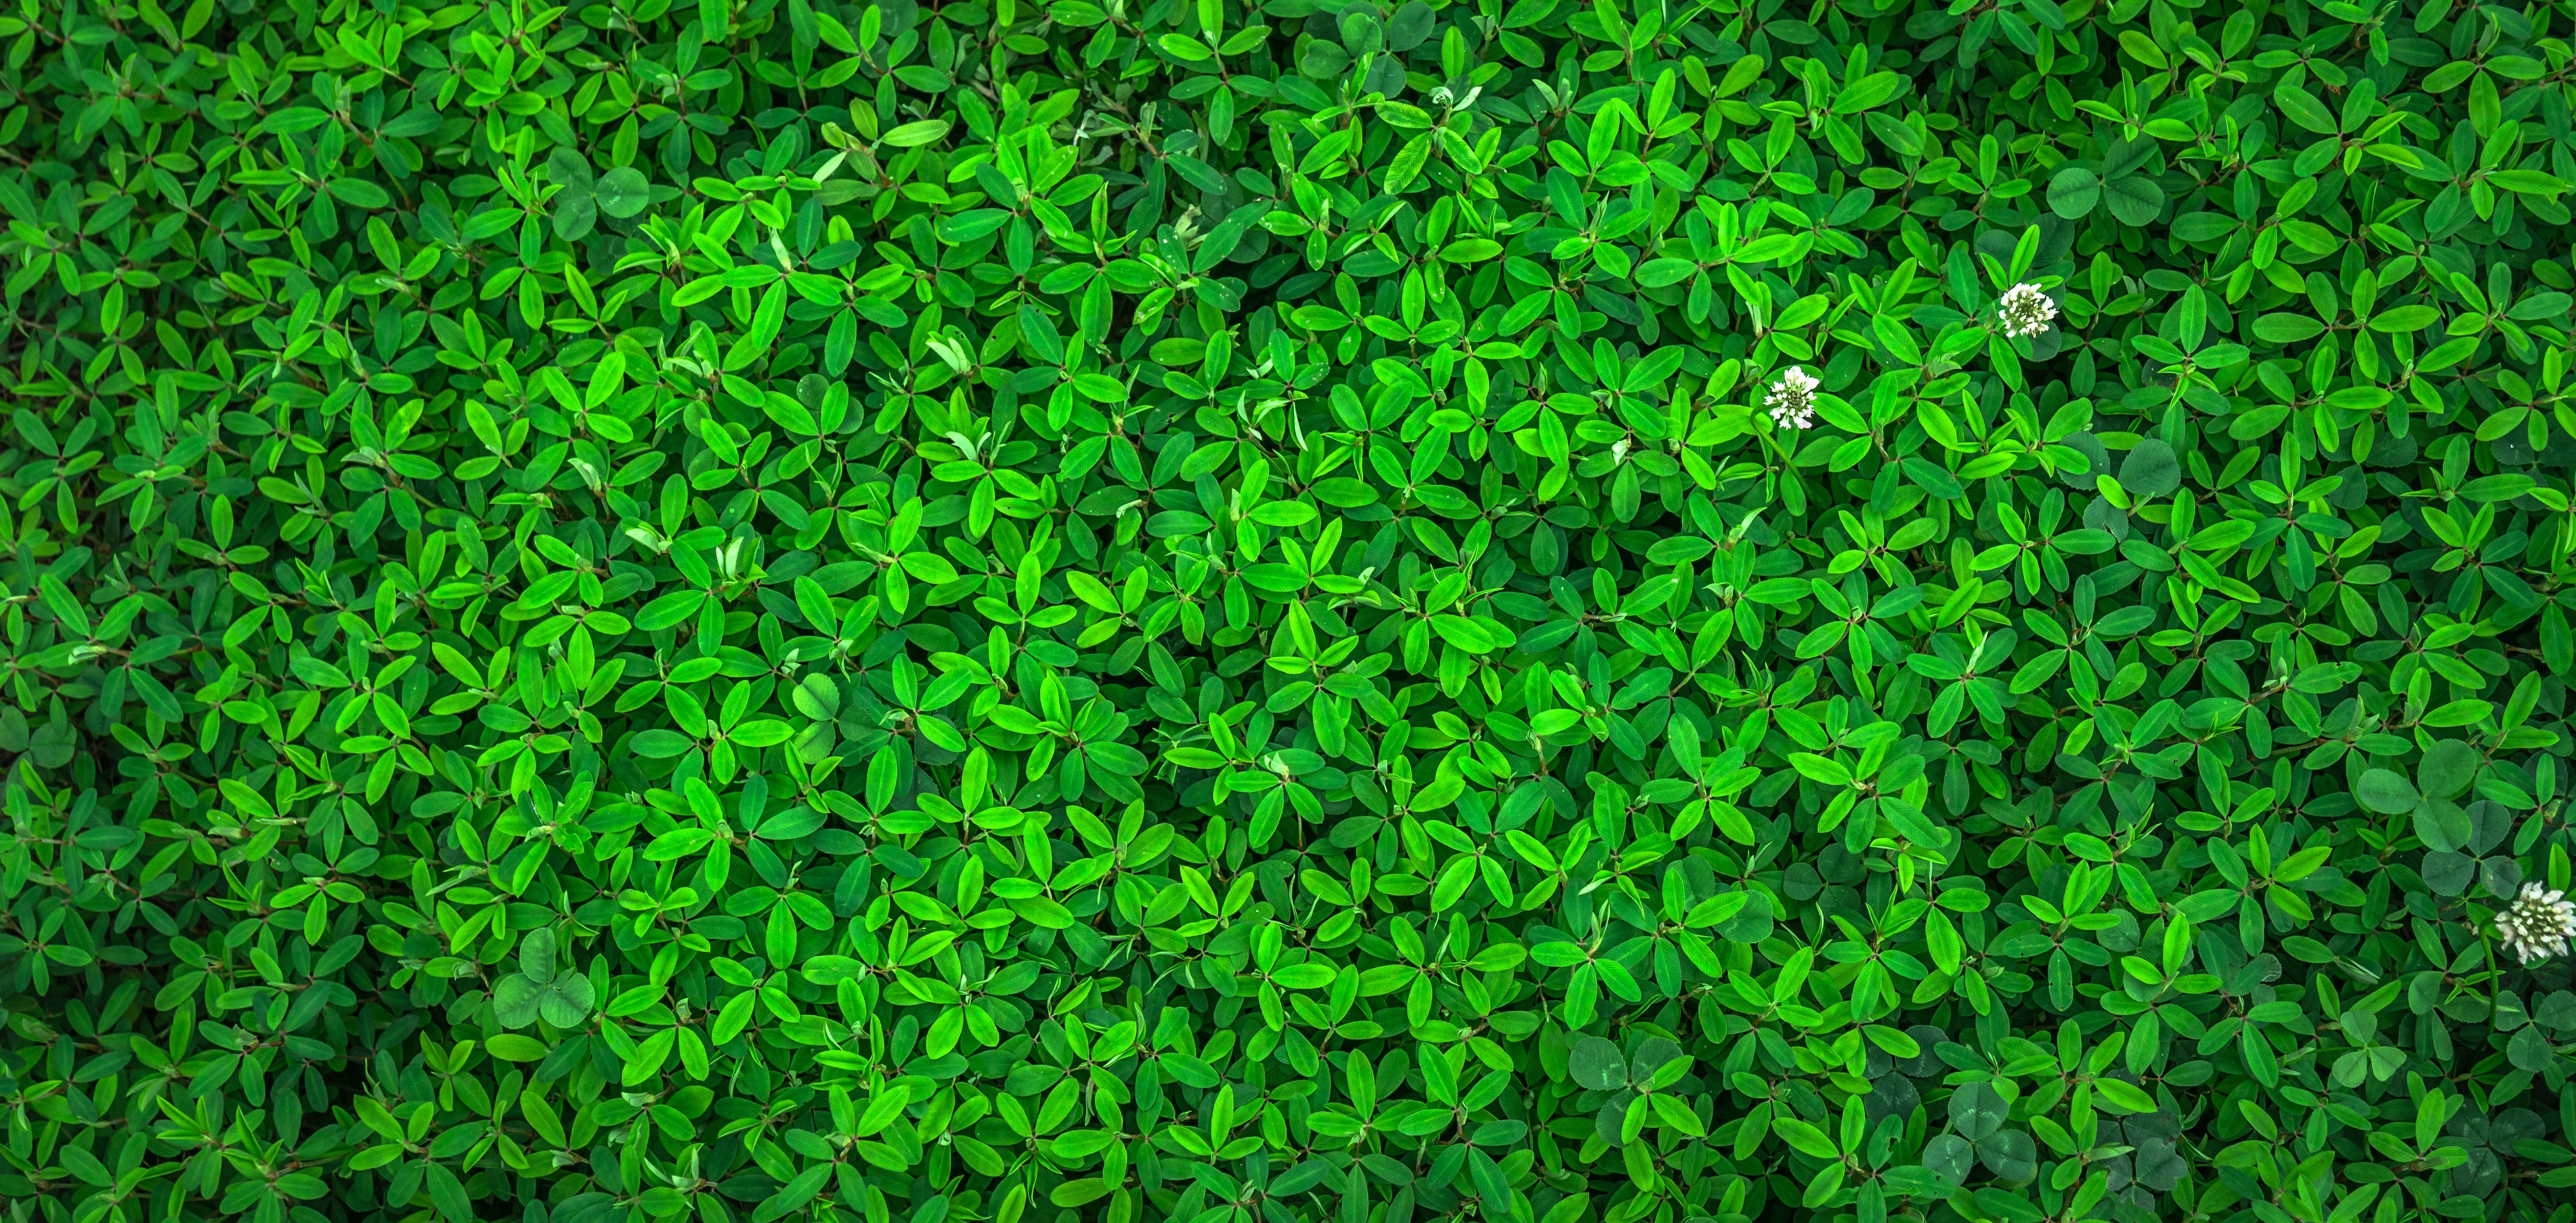 Green Leaf Photos, Download The BEST Free Green Leaf Stock Photos